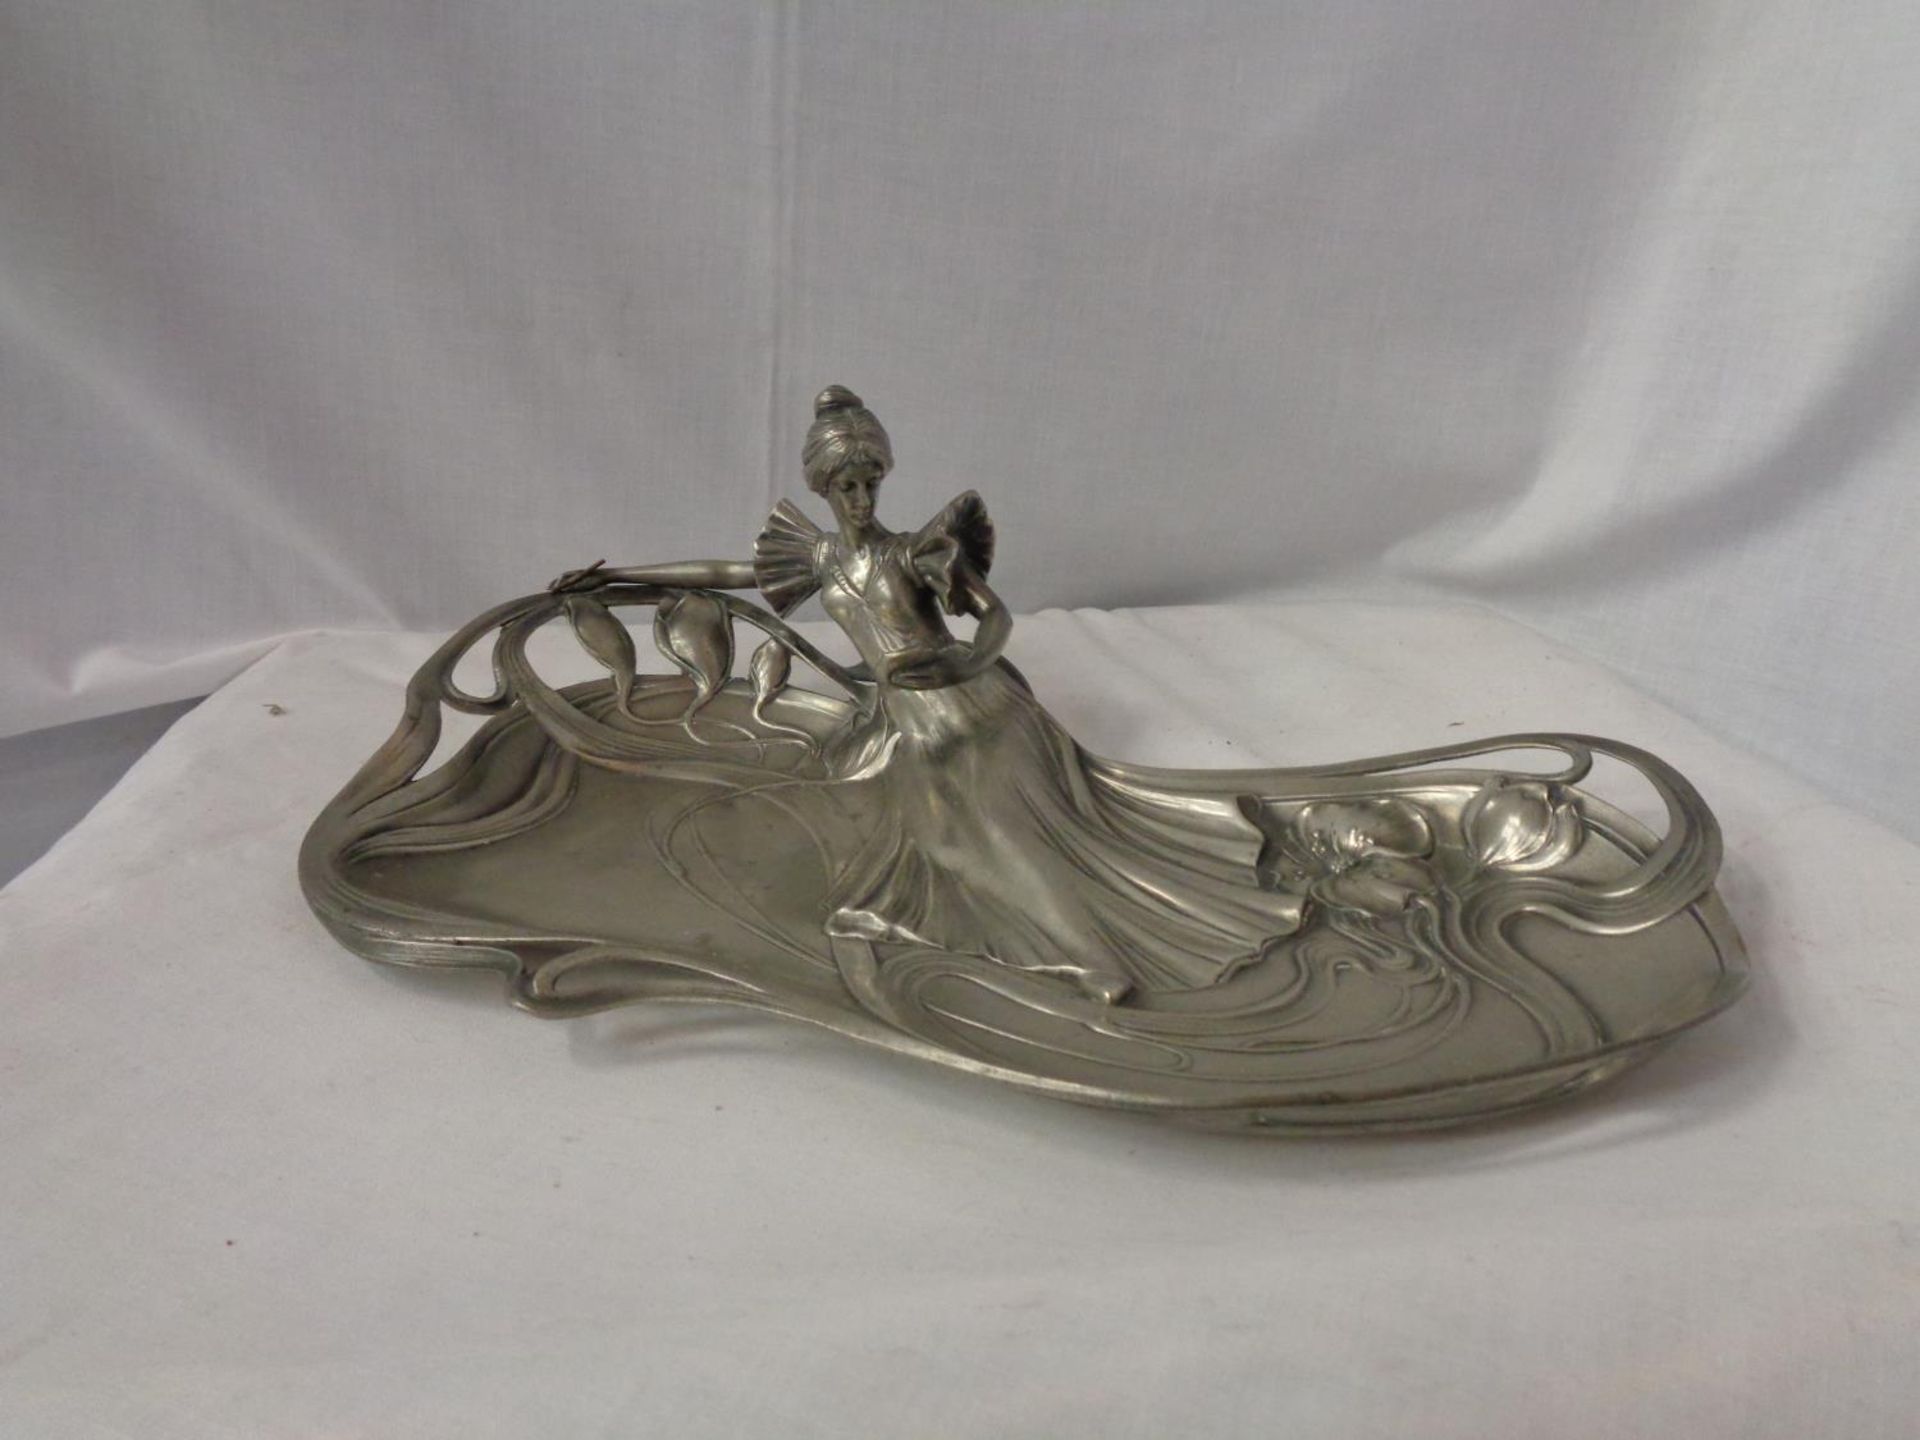 A PEWTER ART DECO STYLE DISH WITH THE FIGURE OF A LADY